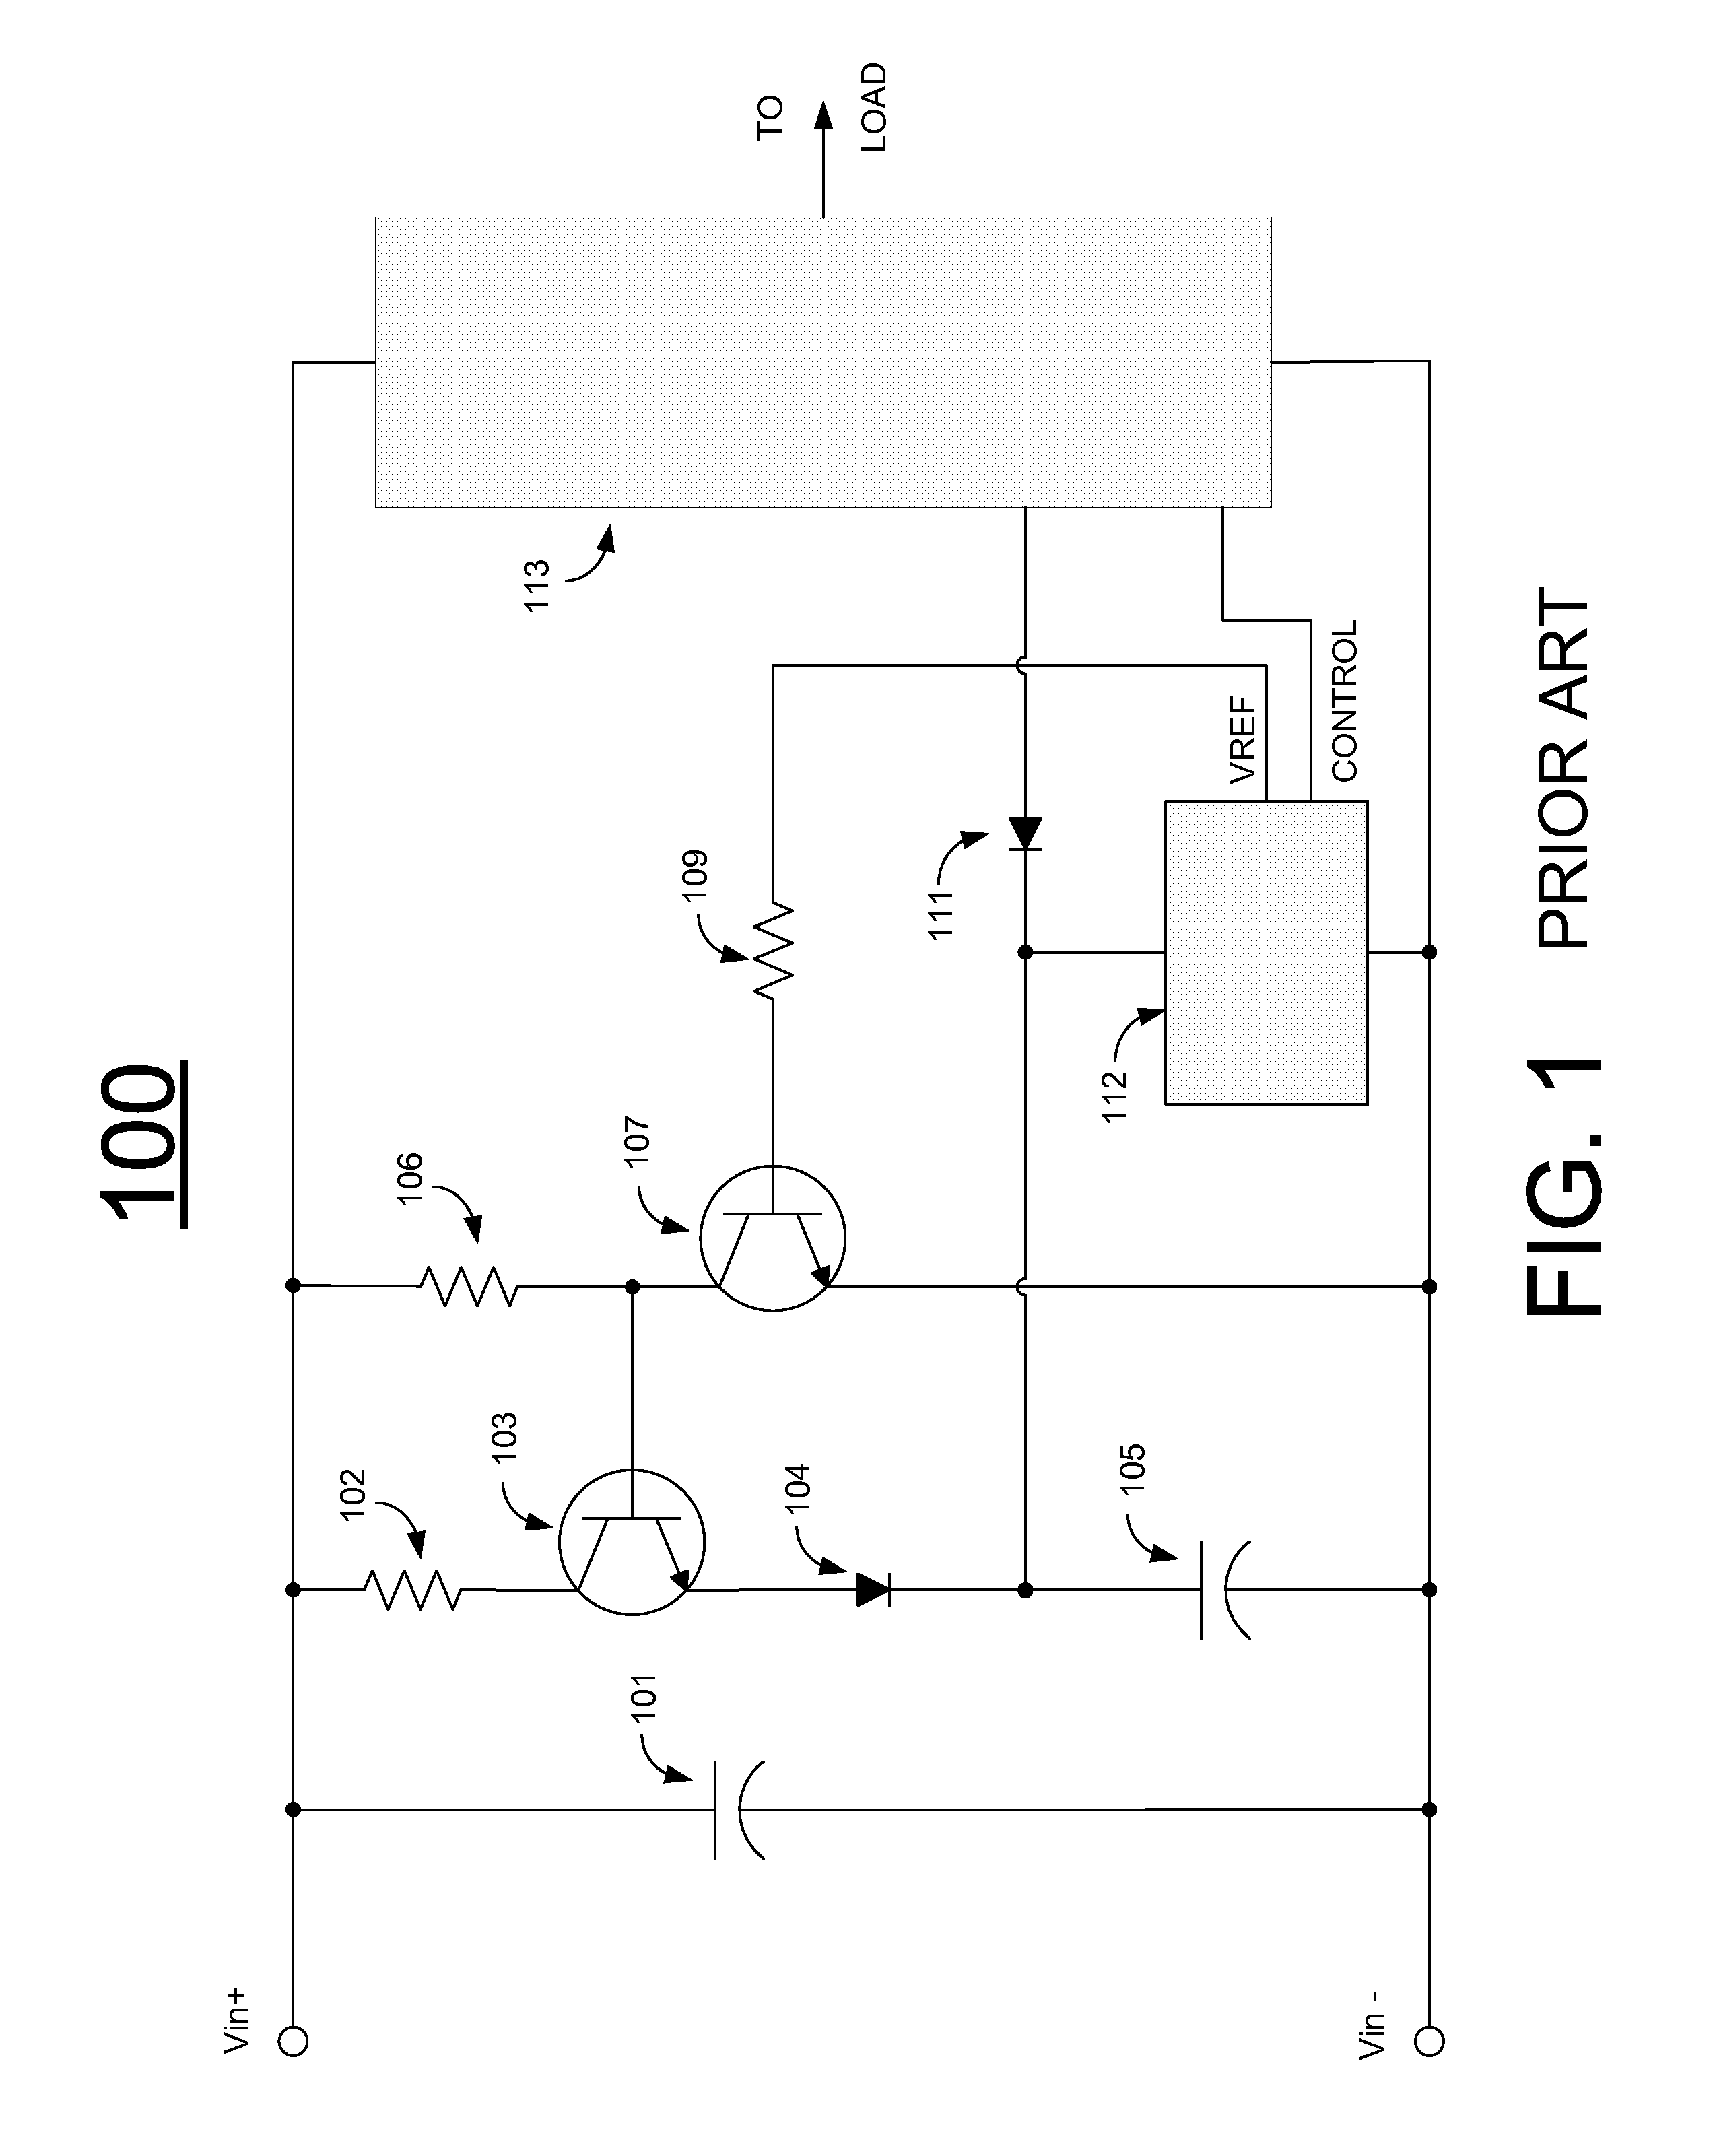 Start-up circuit for power converters with wide input voltage range